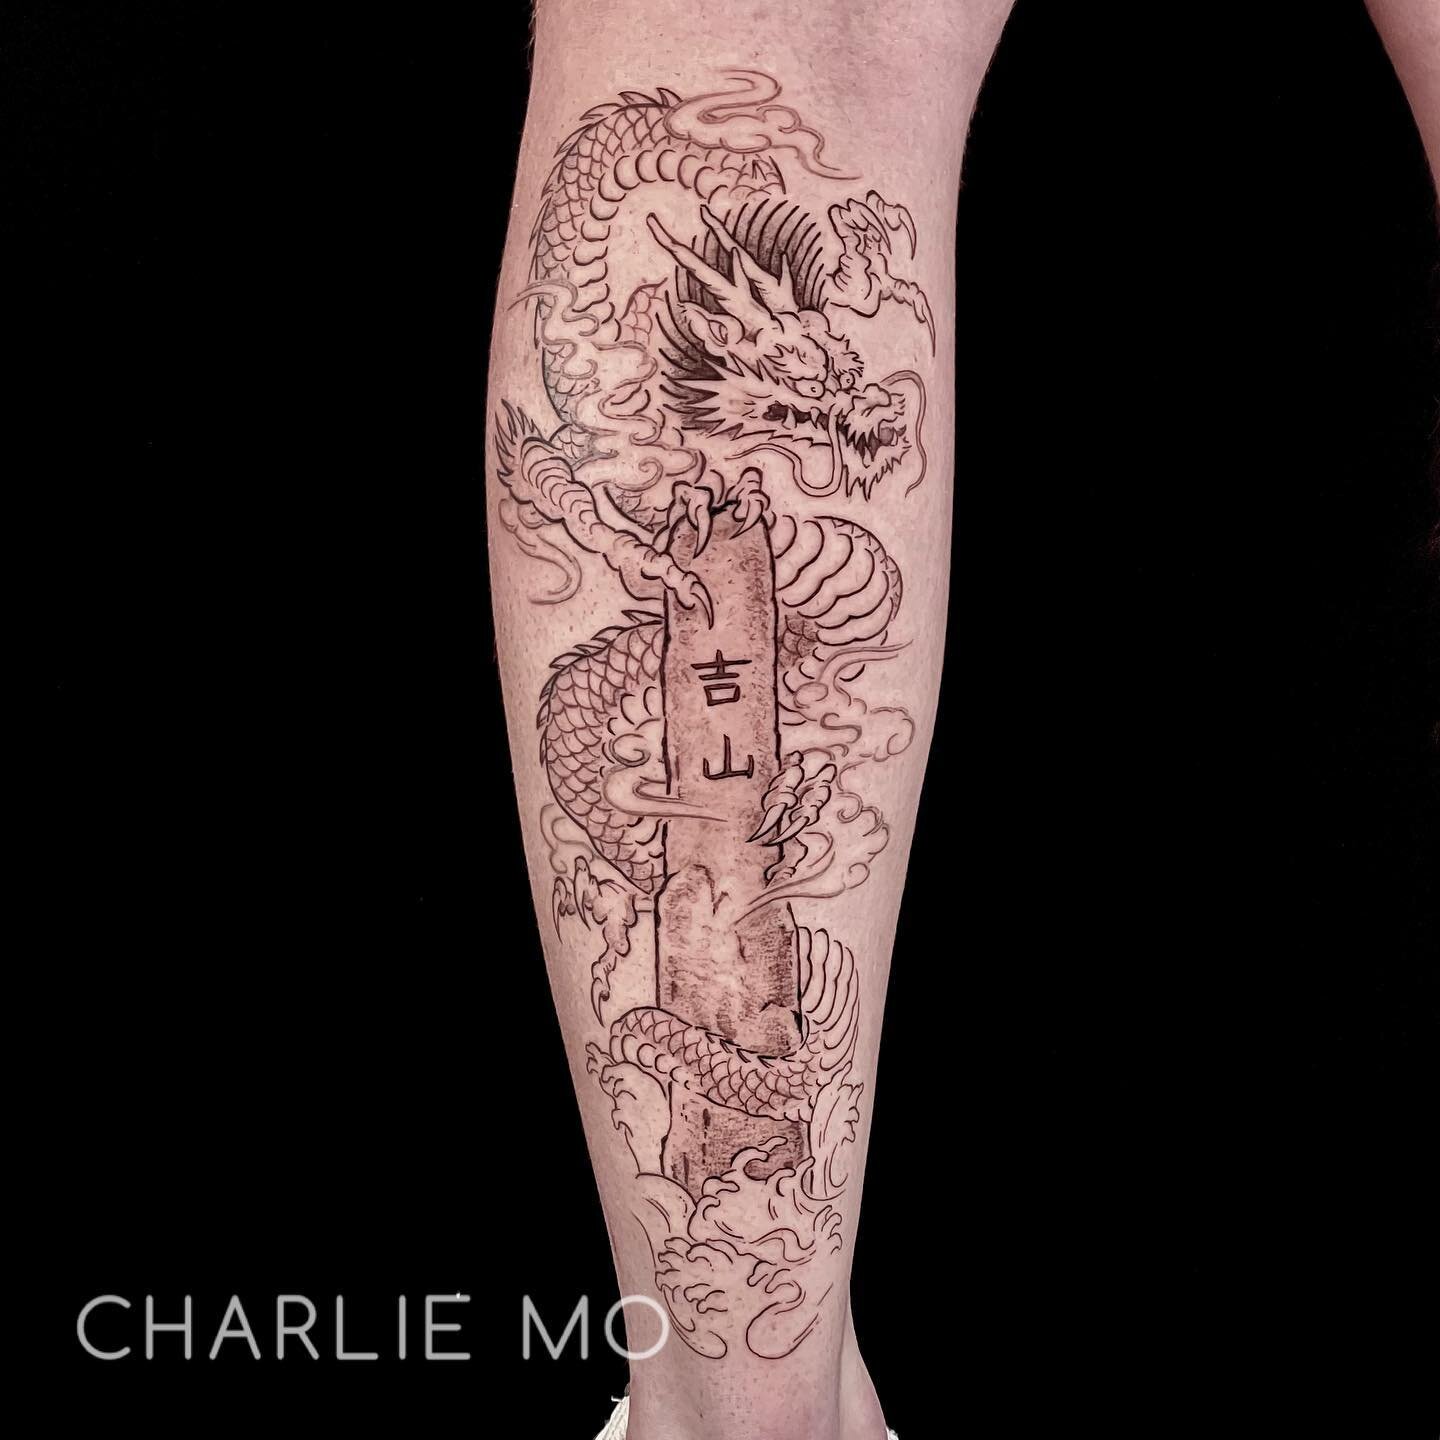 Japanese dragon with family name stone for Shane! Thank you so much for your trust~ 

#dragontattoo #japanesetattoo #asiantattoo #bayareatattooartist #bayareatattoo #tattooartist #art #drawing #illustration #illustrativetattoo  #blackwork #blackworkt